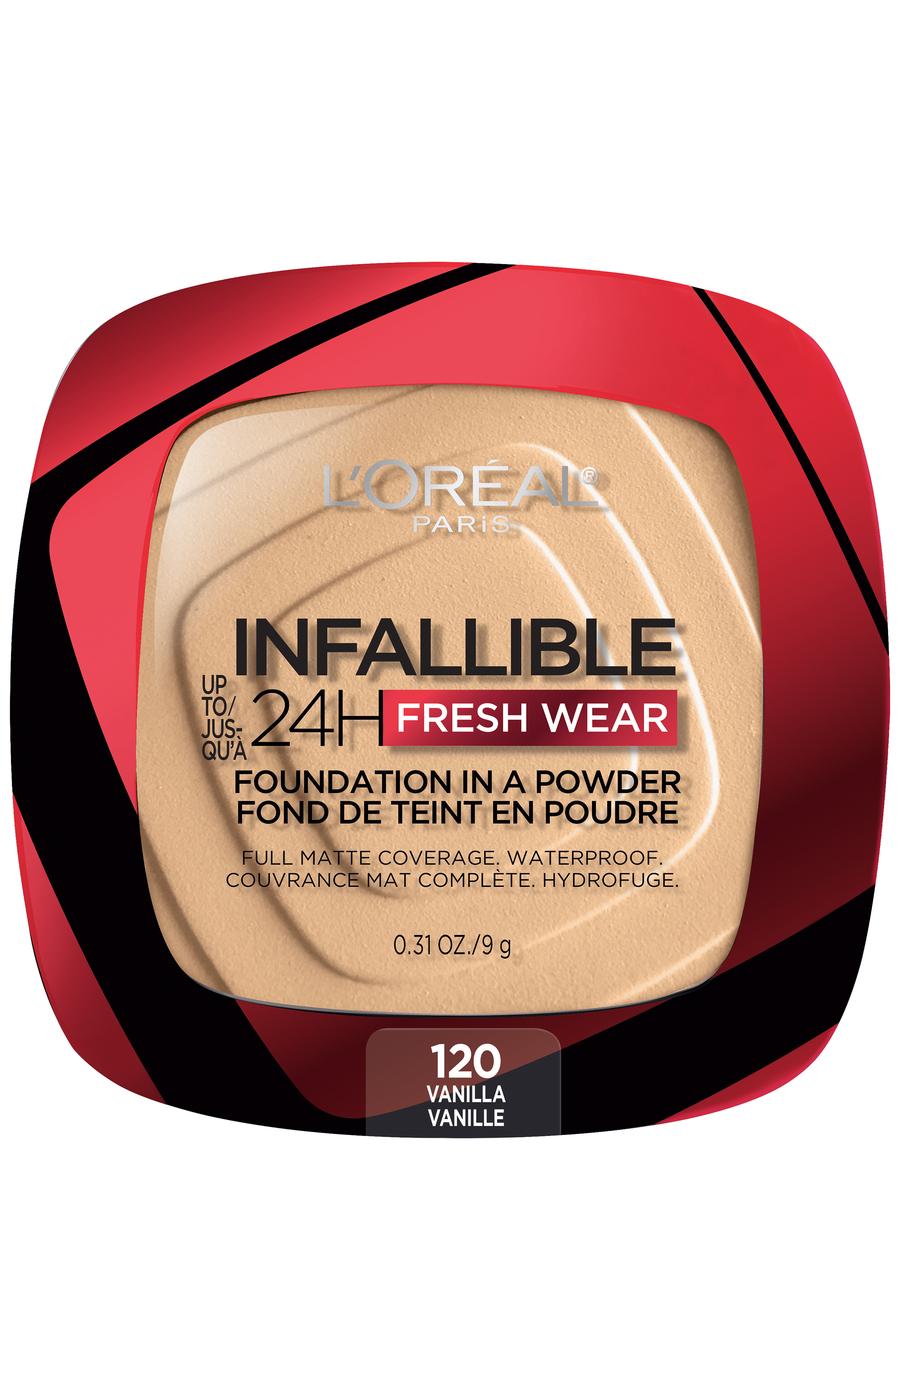 L'Oréal Paris Infallible Up to 24H Fresh Wear Foundation in a Powder Vanilla; image 1 of 4